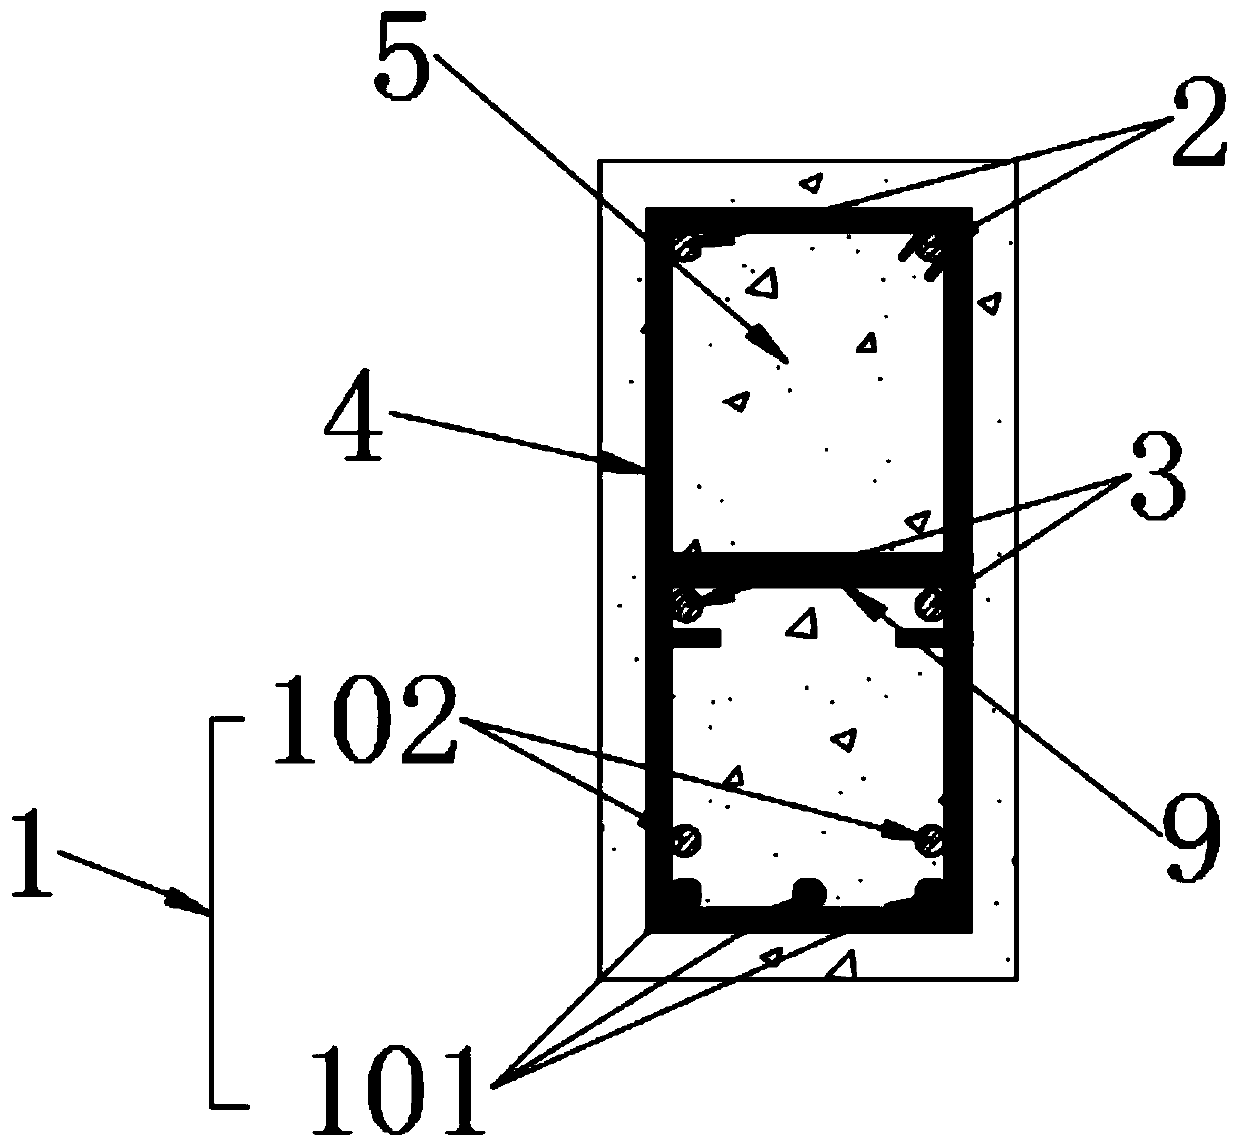 Method for realizing crack resistance of concrete beam member by optimizing ribbed FRP bars